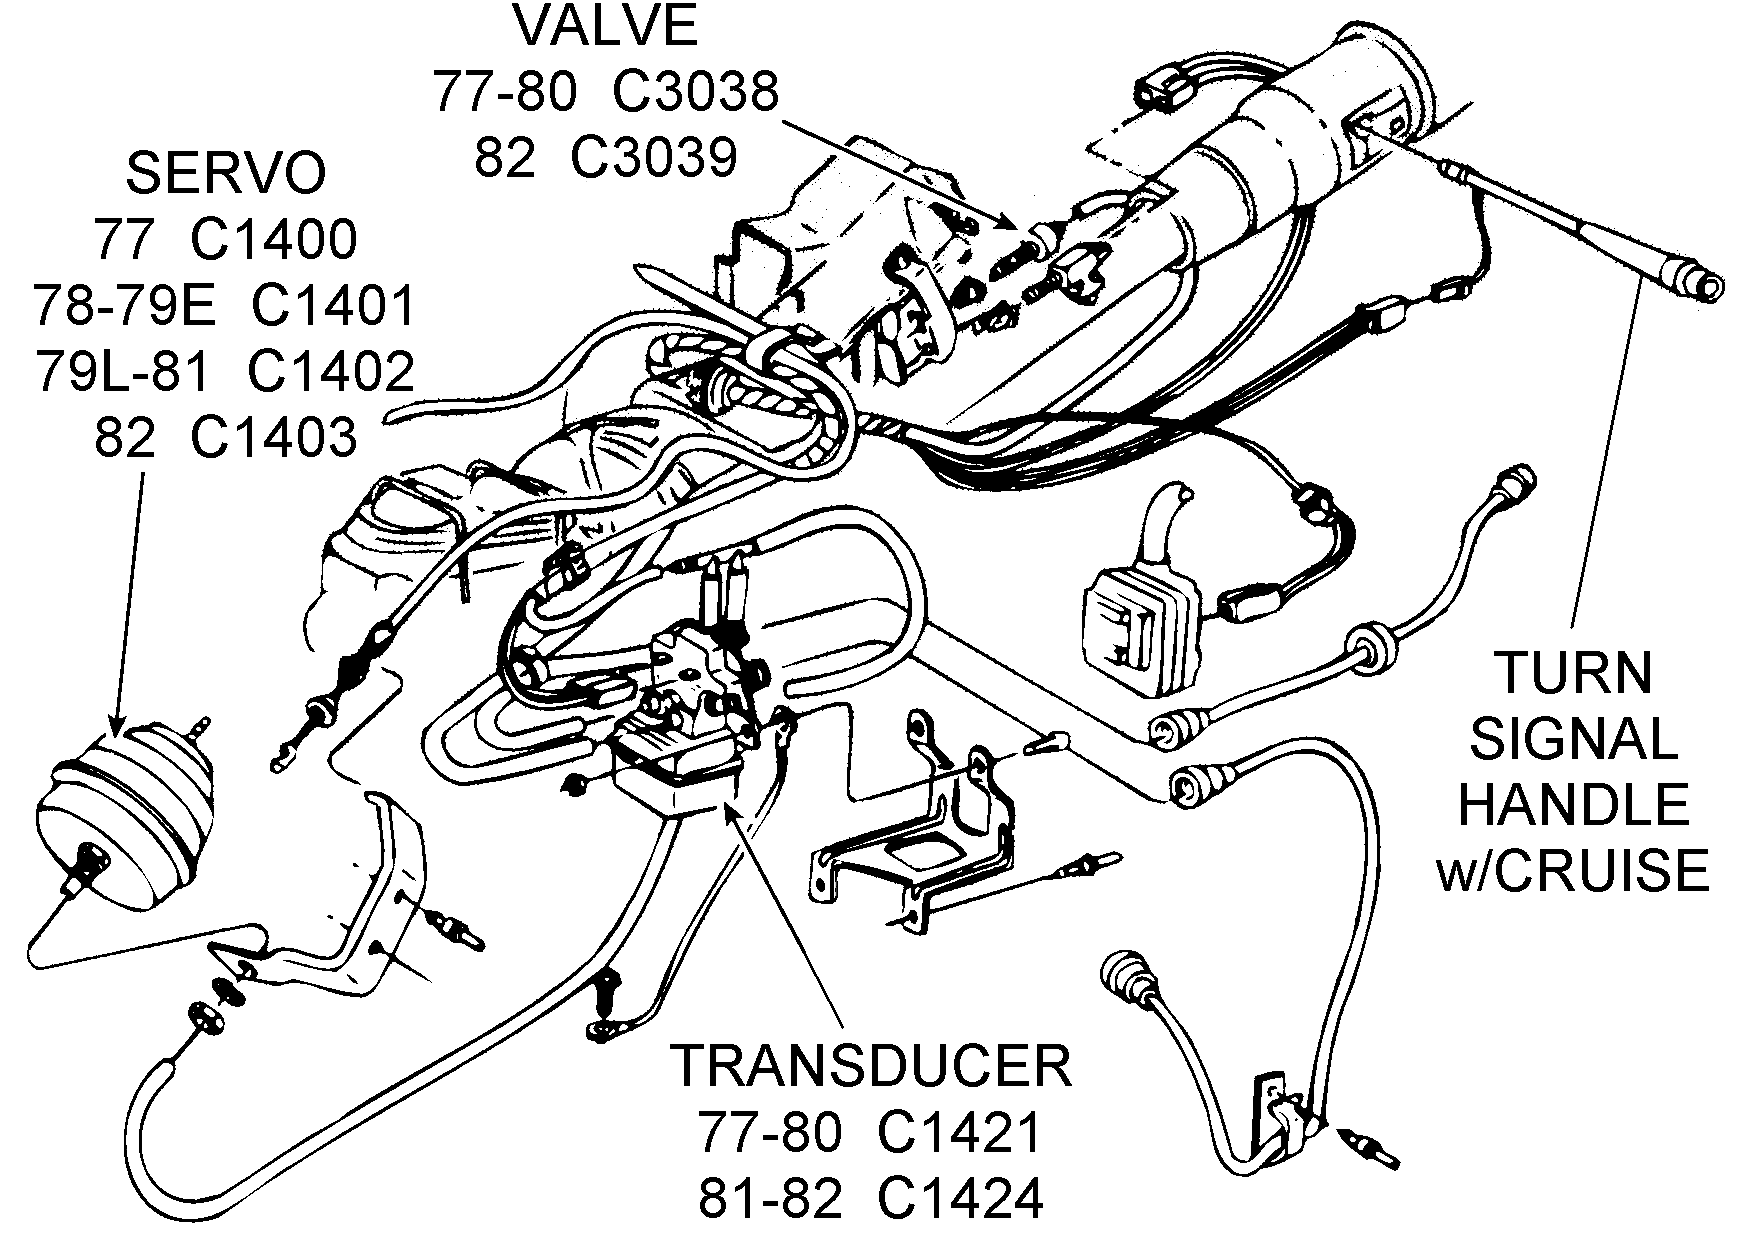 Cruise control Vac Drawing for 1982 with Resume ... 2000 camaro pcm wiring diagram free download 